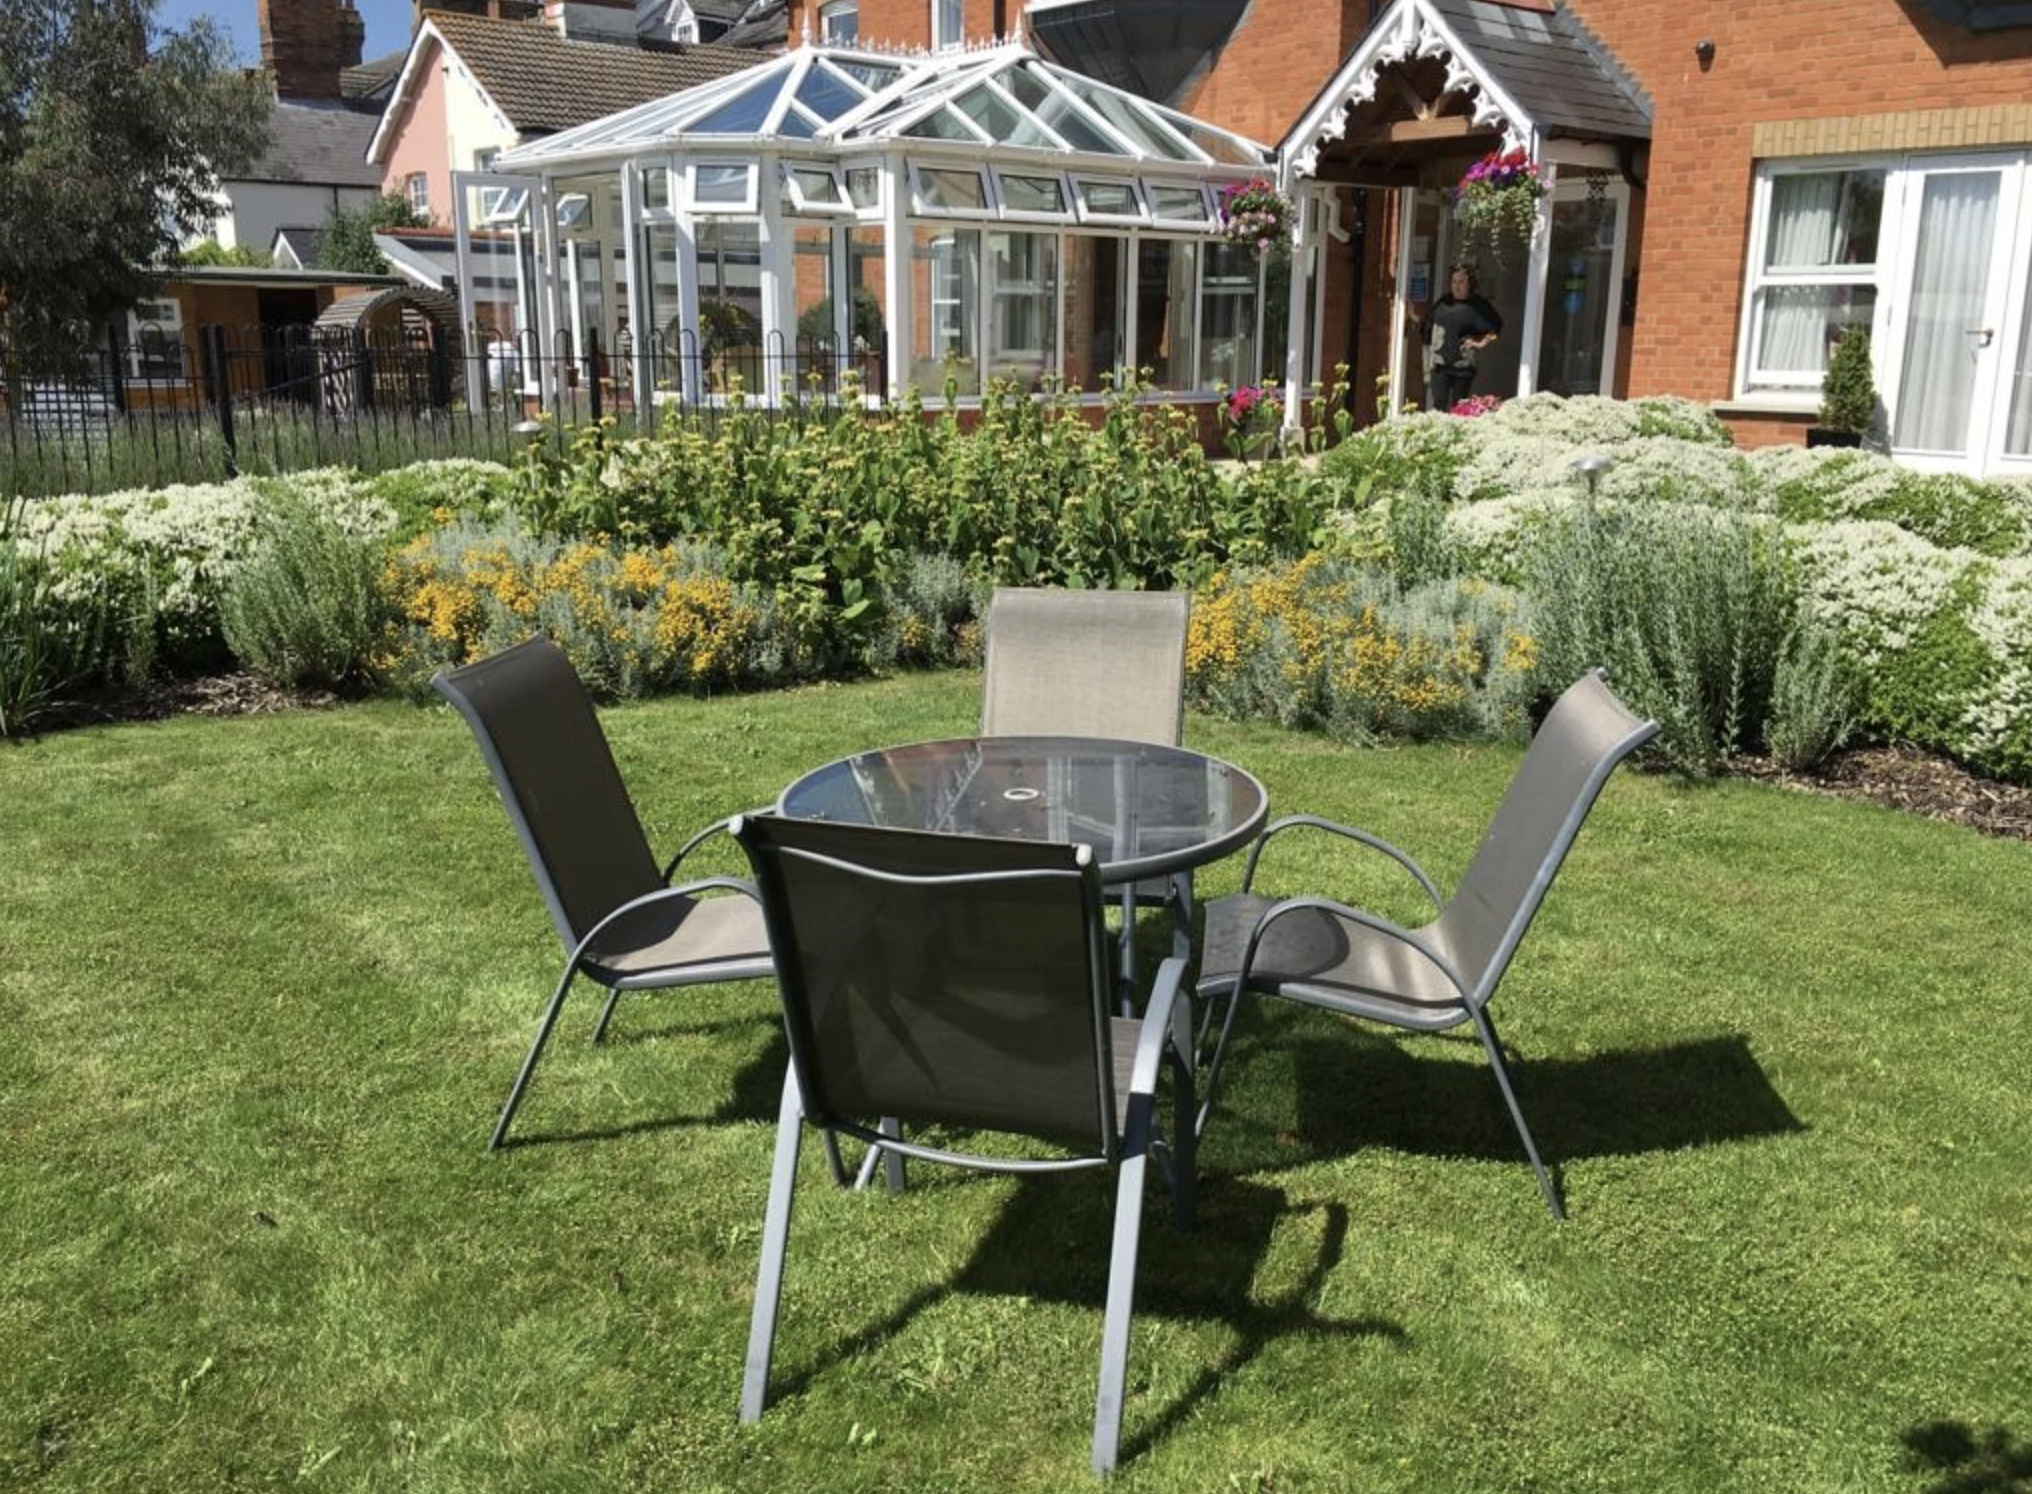 Garden of Byron House care home in Aylesbury, Buckinghamshire